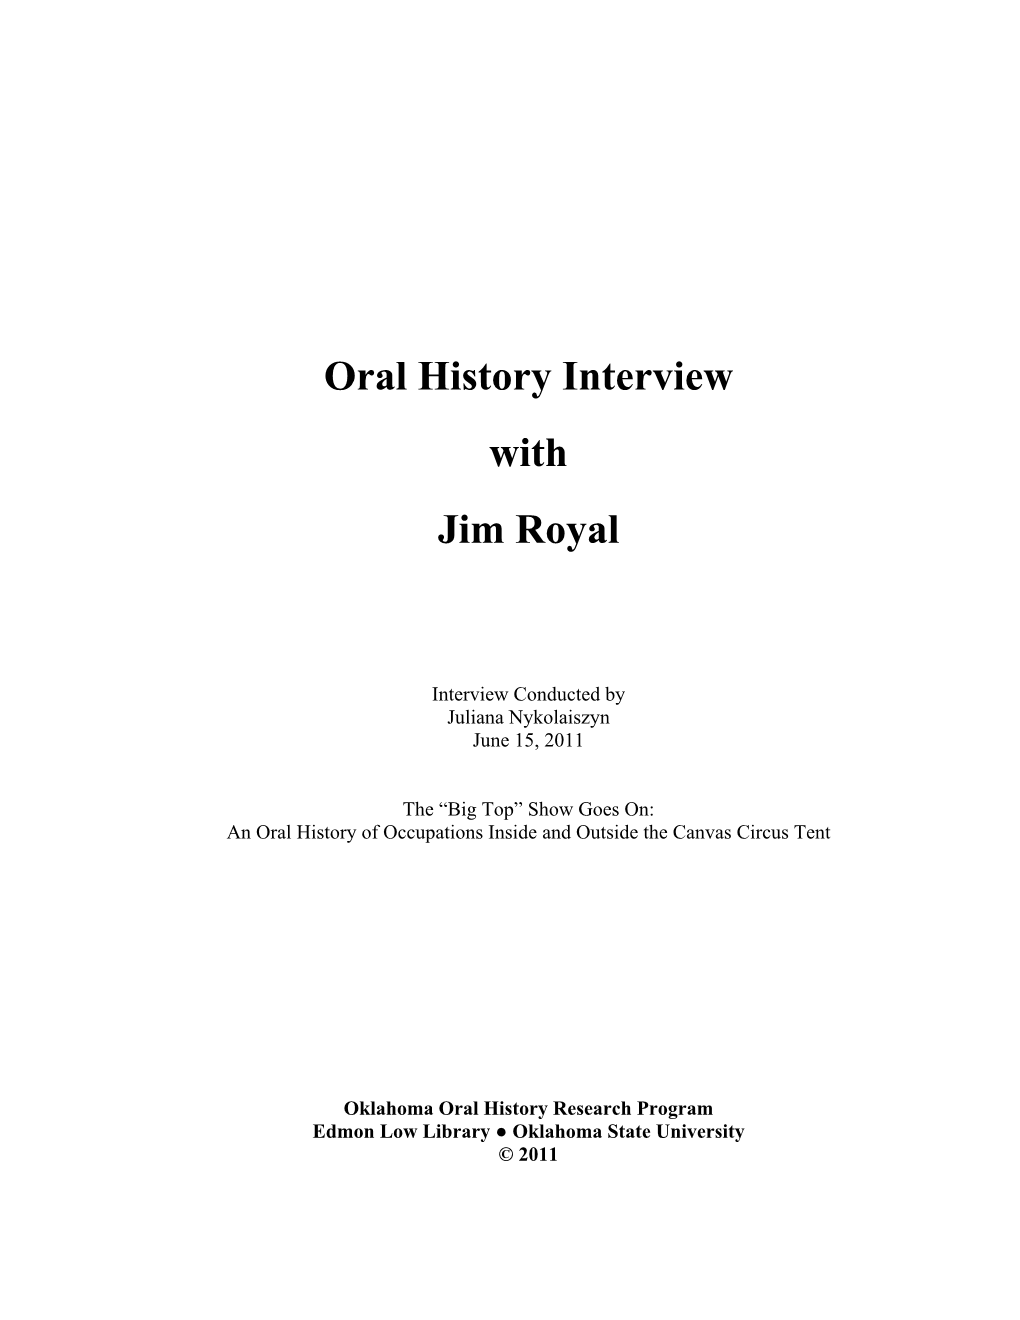 Oral History Interview with Jim Royal